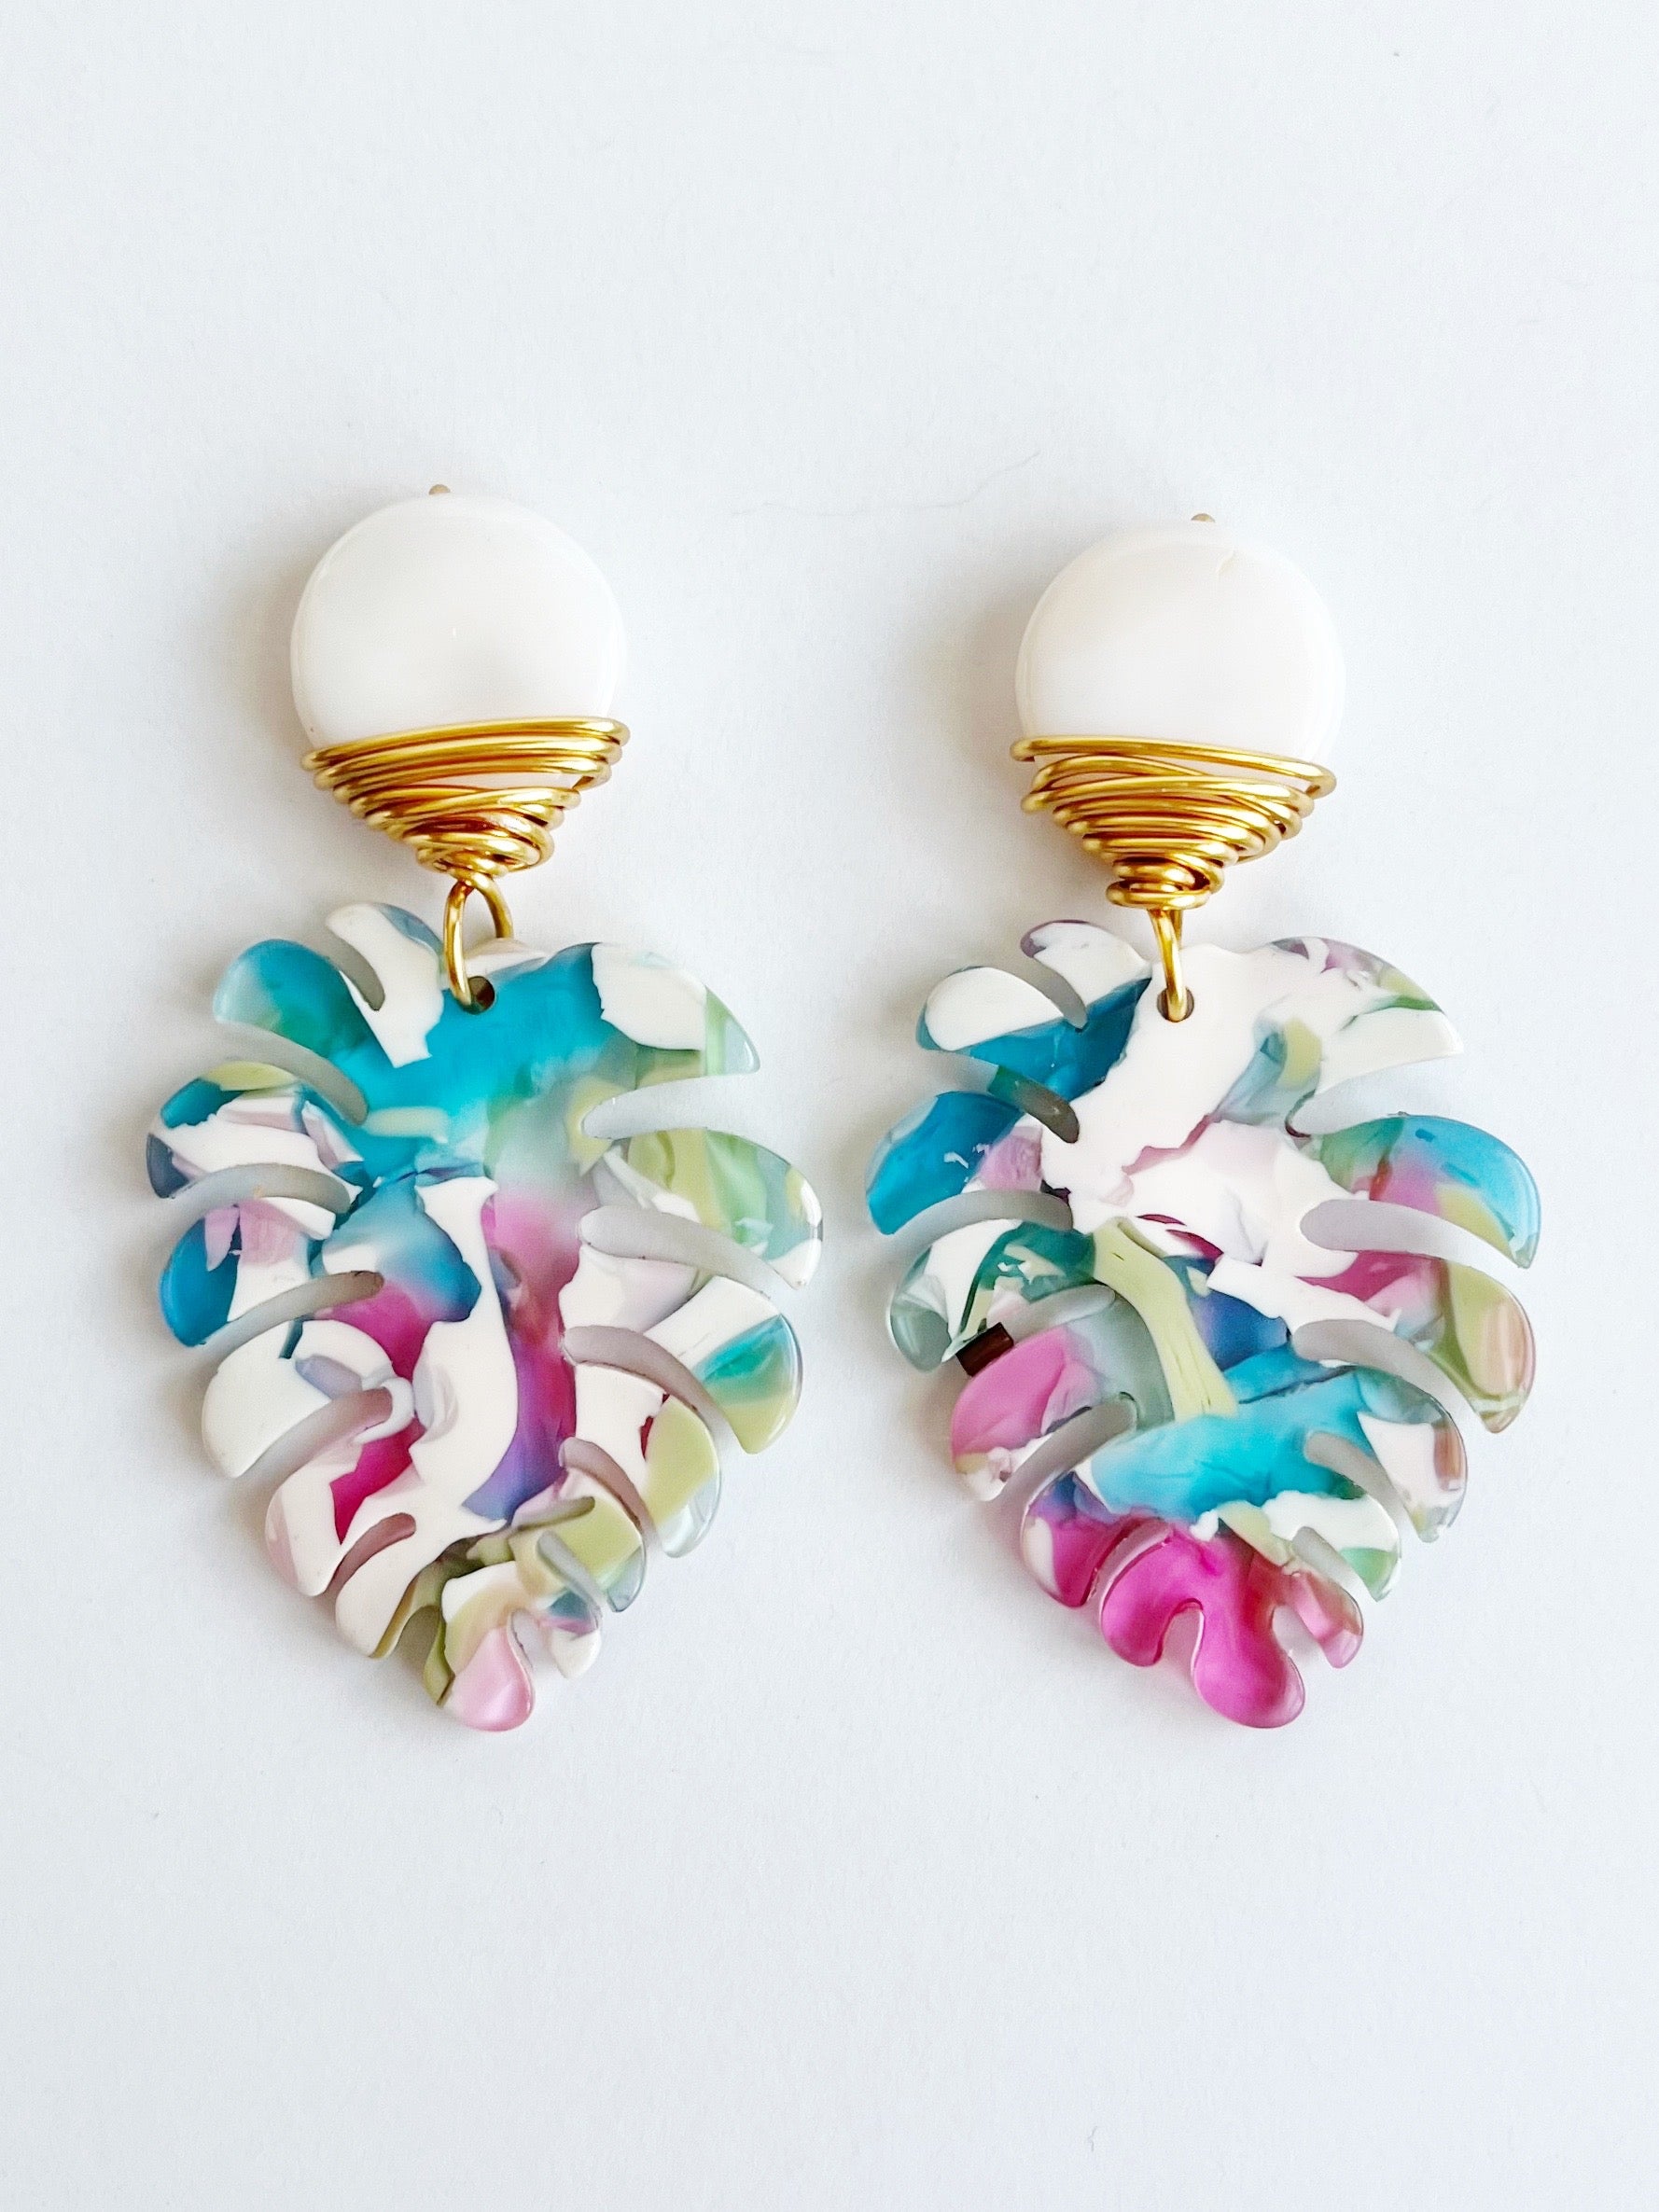 Mini Palm Dangle Leaf Earrings in Blue, Pink, and White wrapped with gold plated wire earrings.